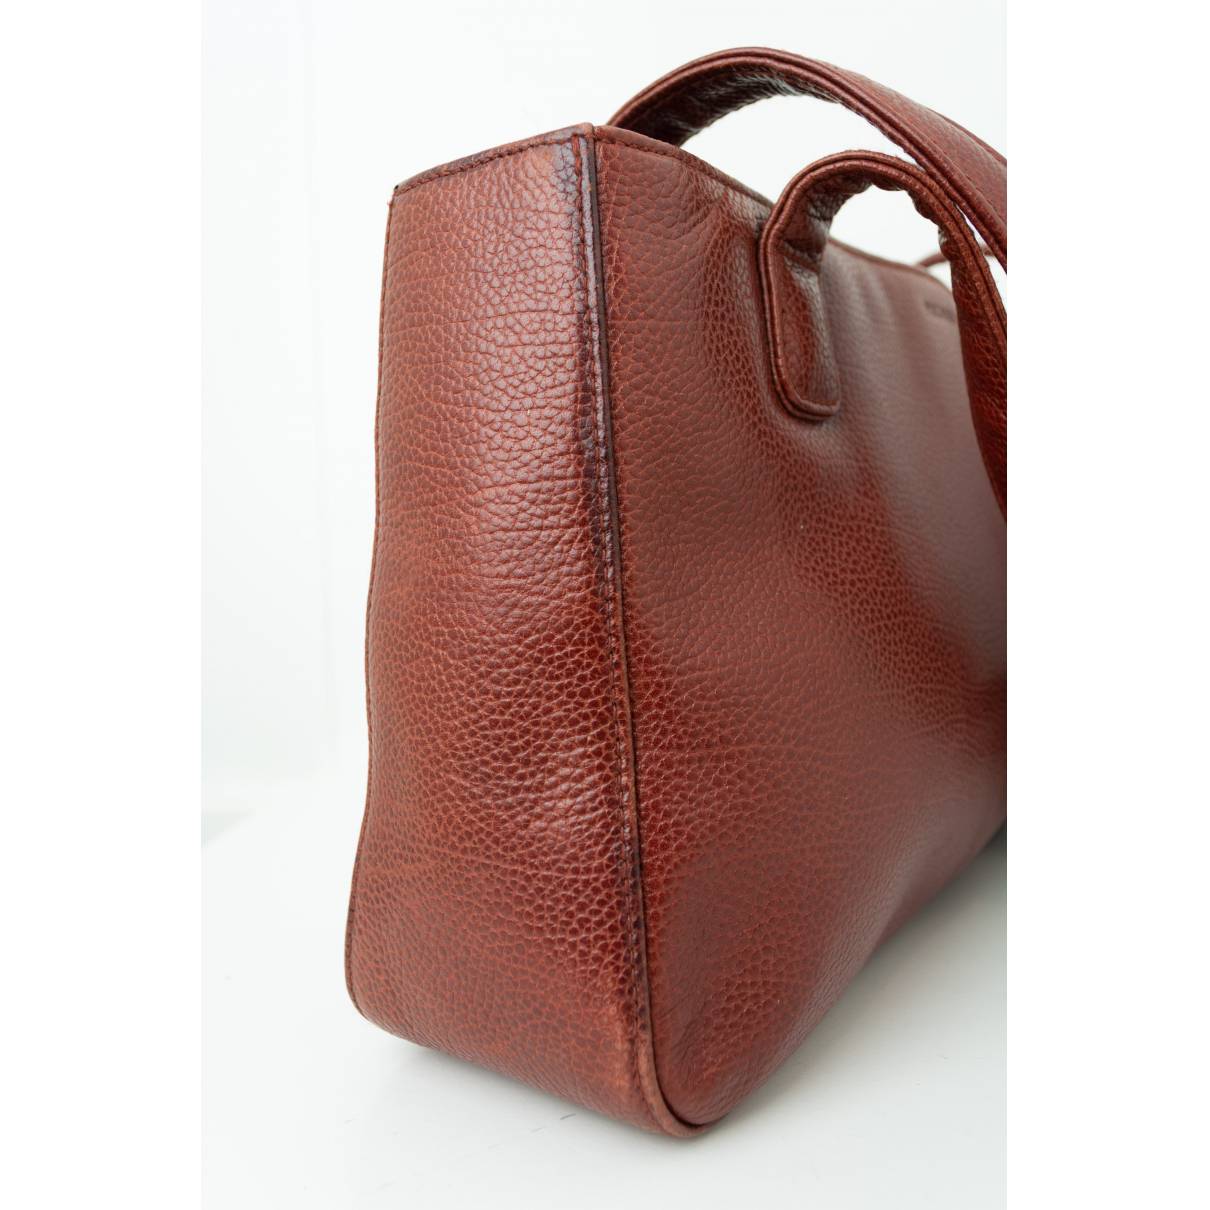 Picard - Authenticated Handbag - Leather Burgundy for Women, Good Condition